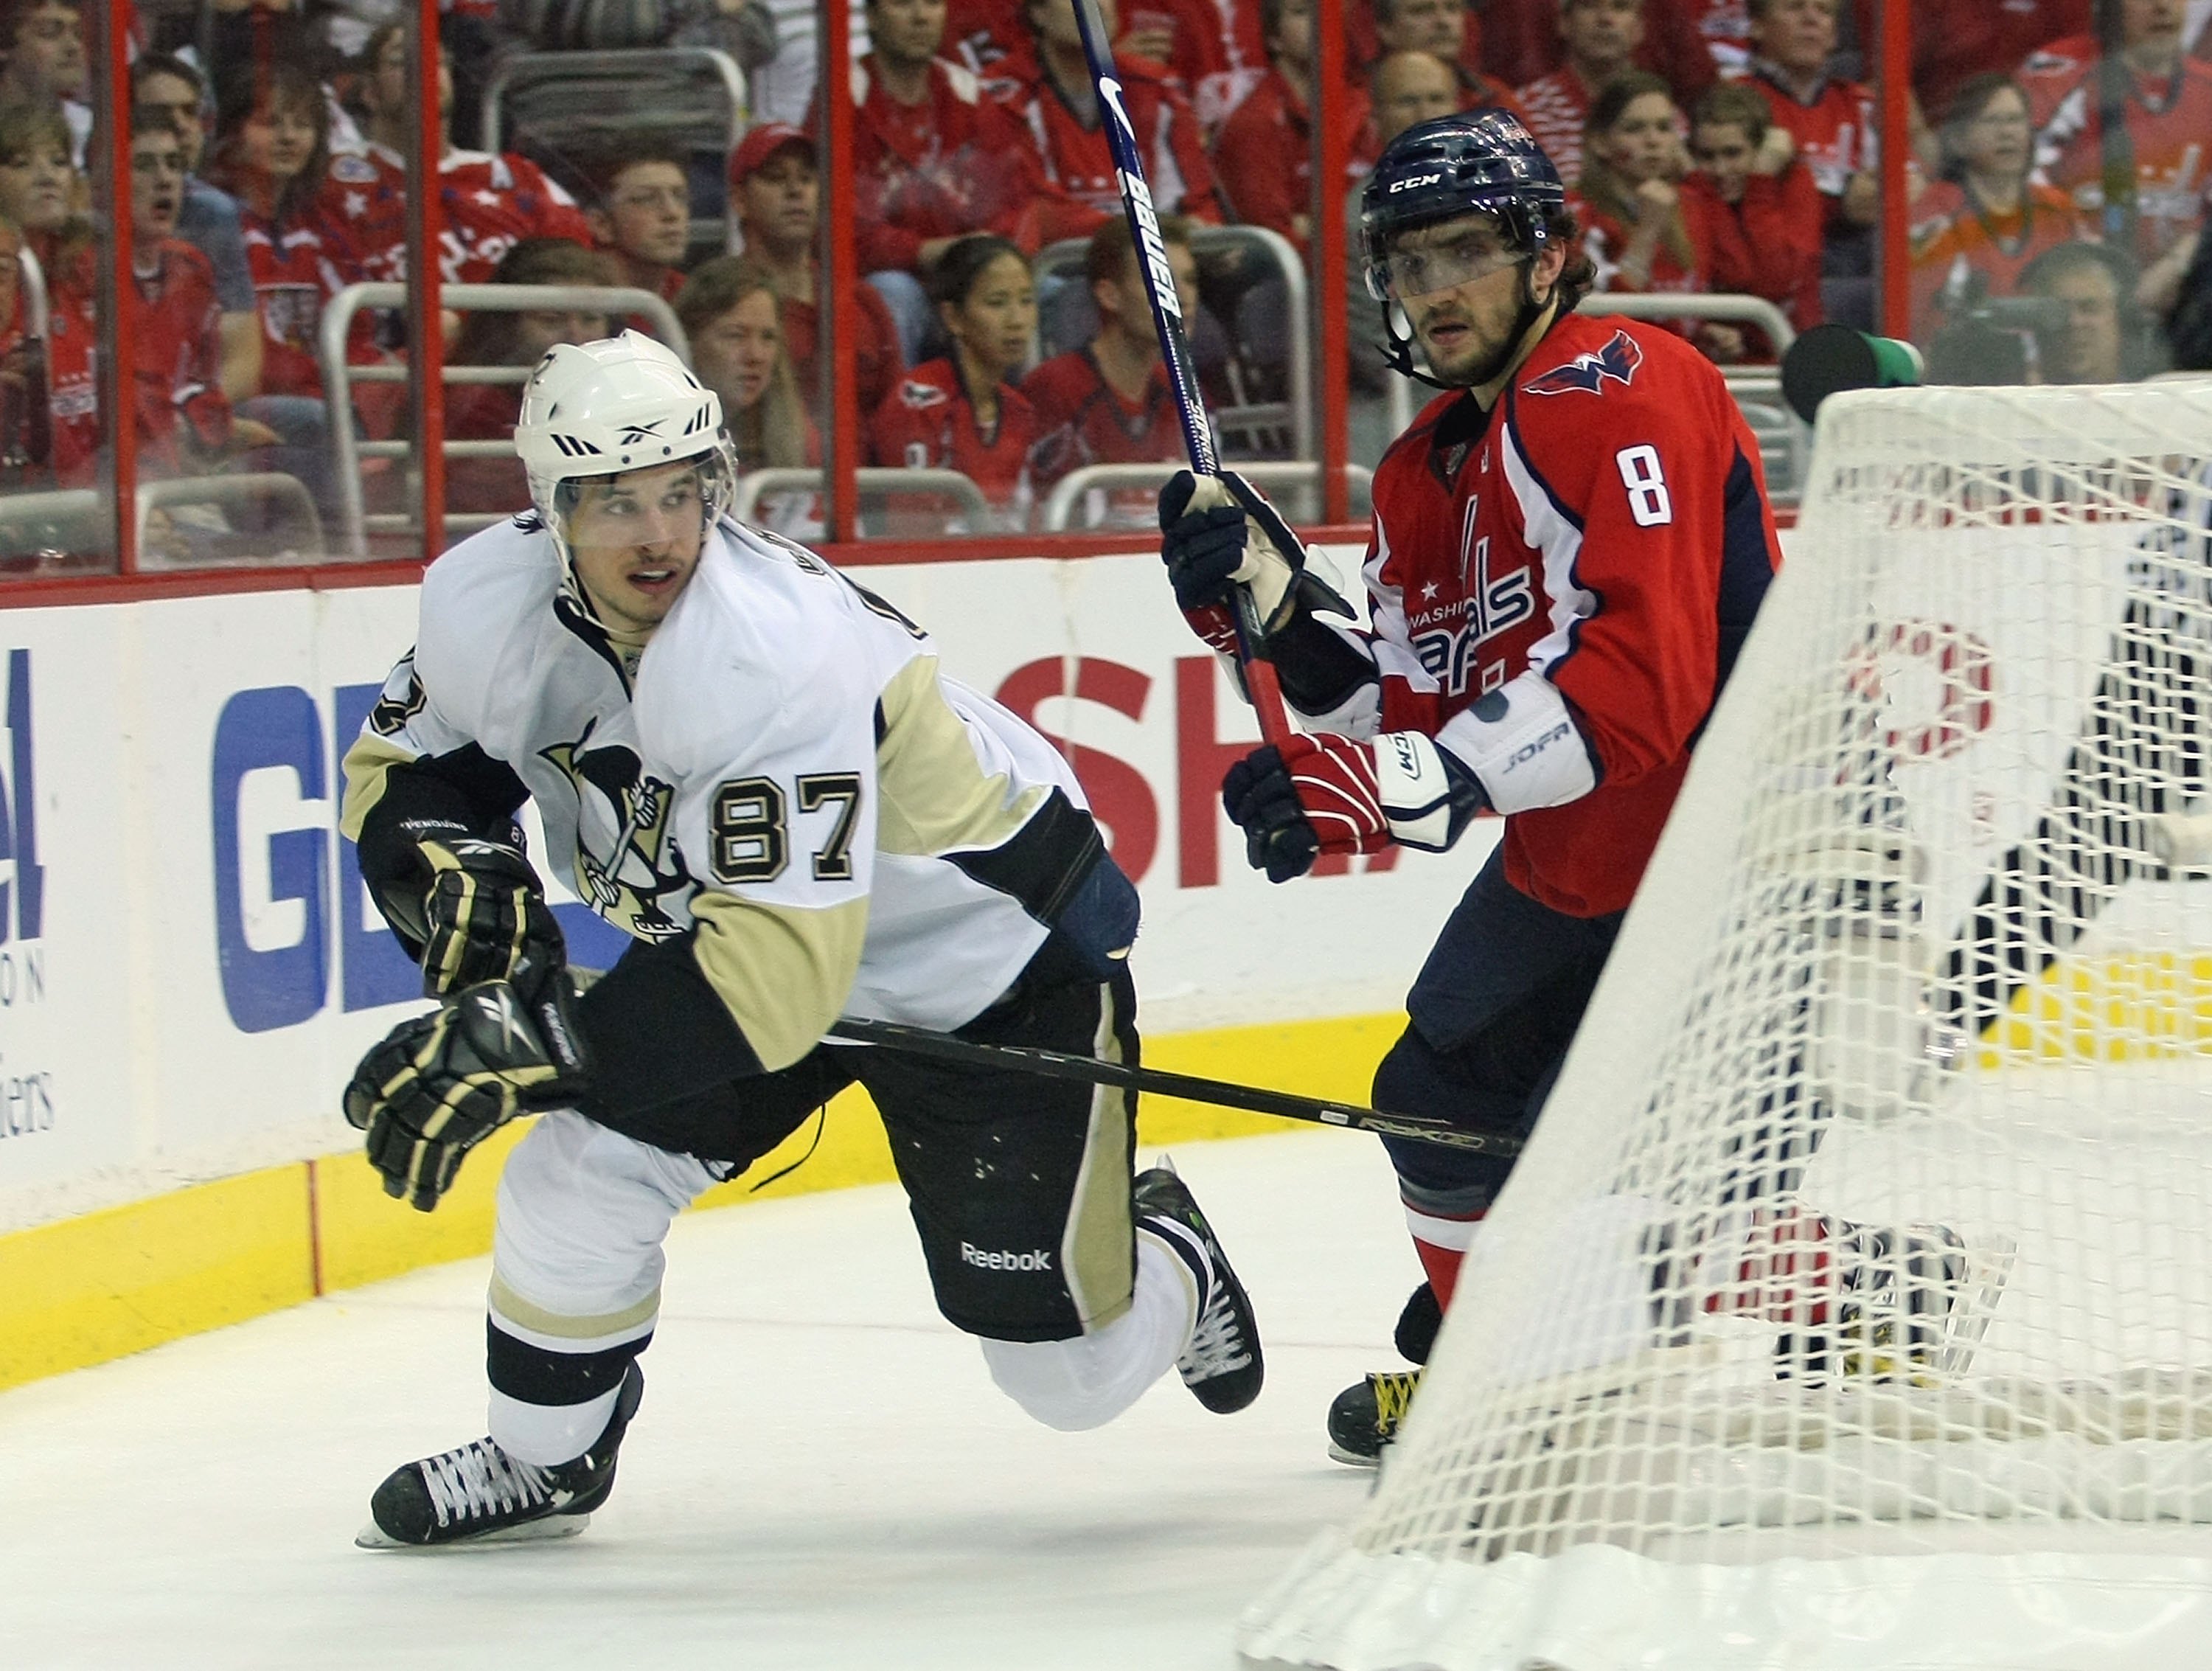 Crosby asked Ovi who would be their ideal linemate if they played